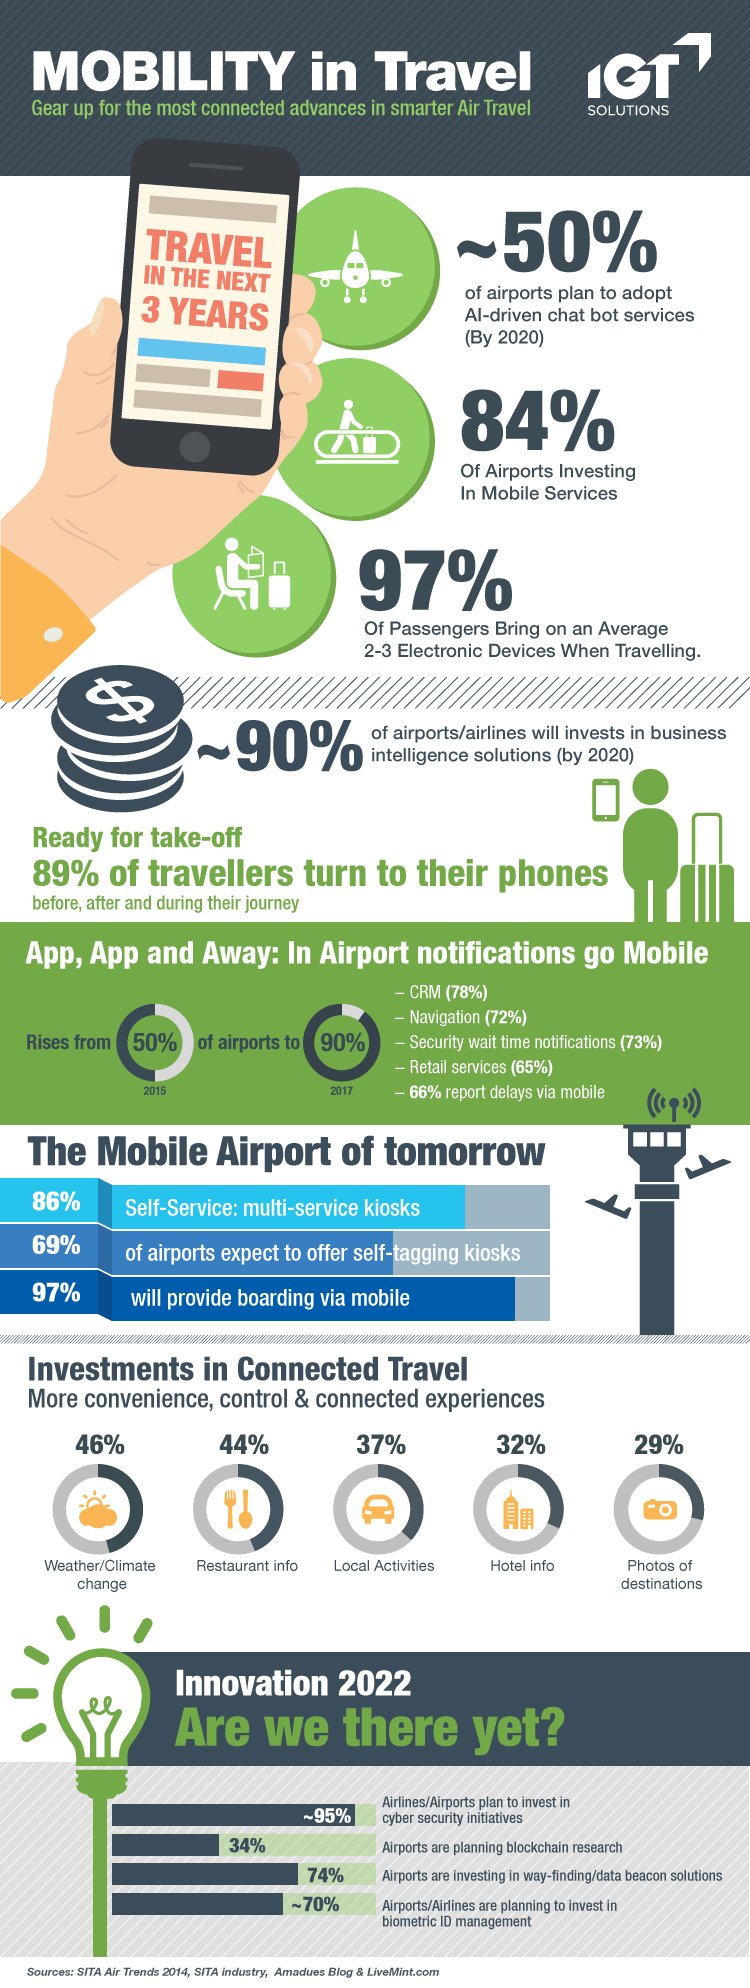 Mobility in Air Travel creates Connected Experiences